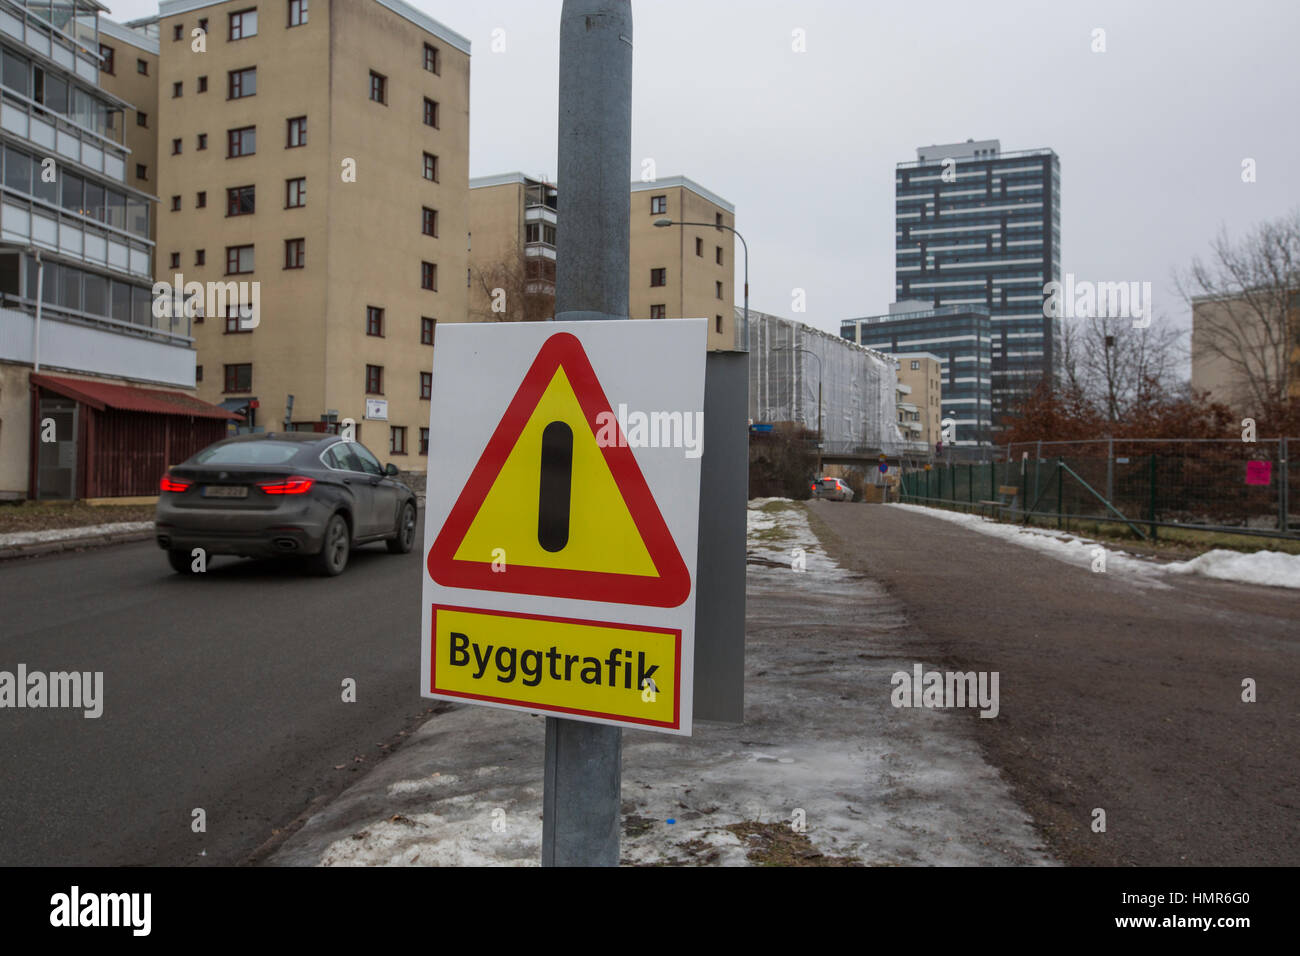 Pay attention, construction traffic in the area, Kista, Stockholm, Sweden. Stock Photo